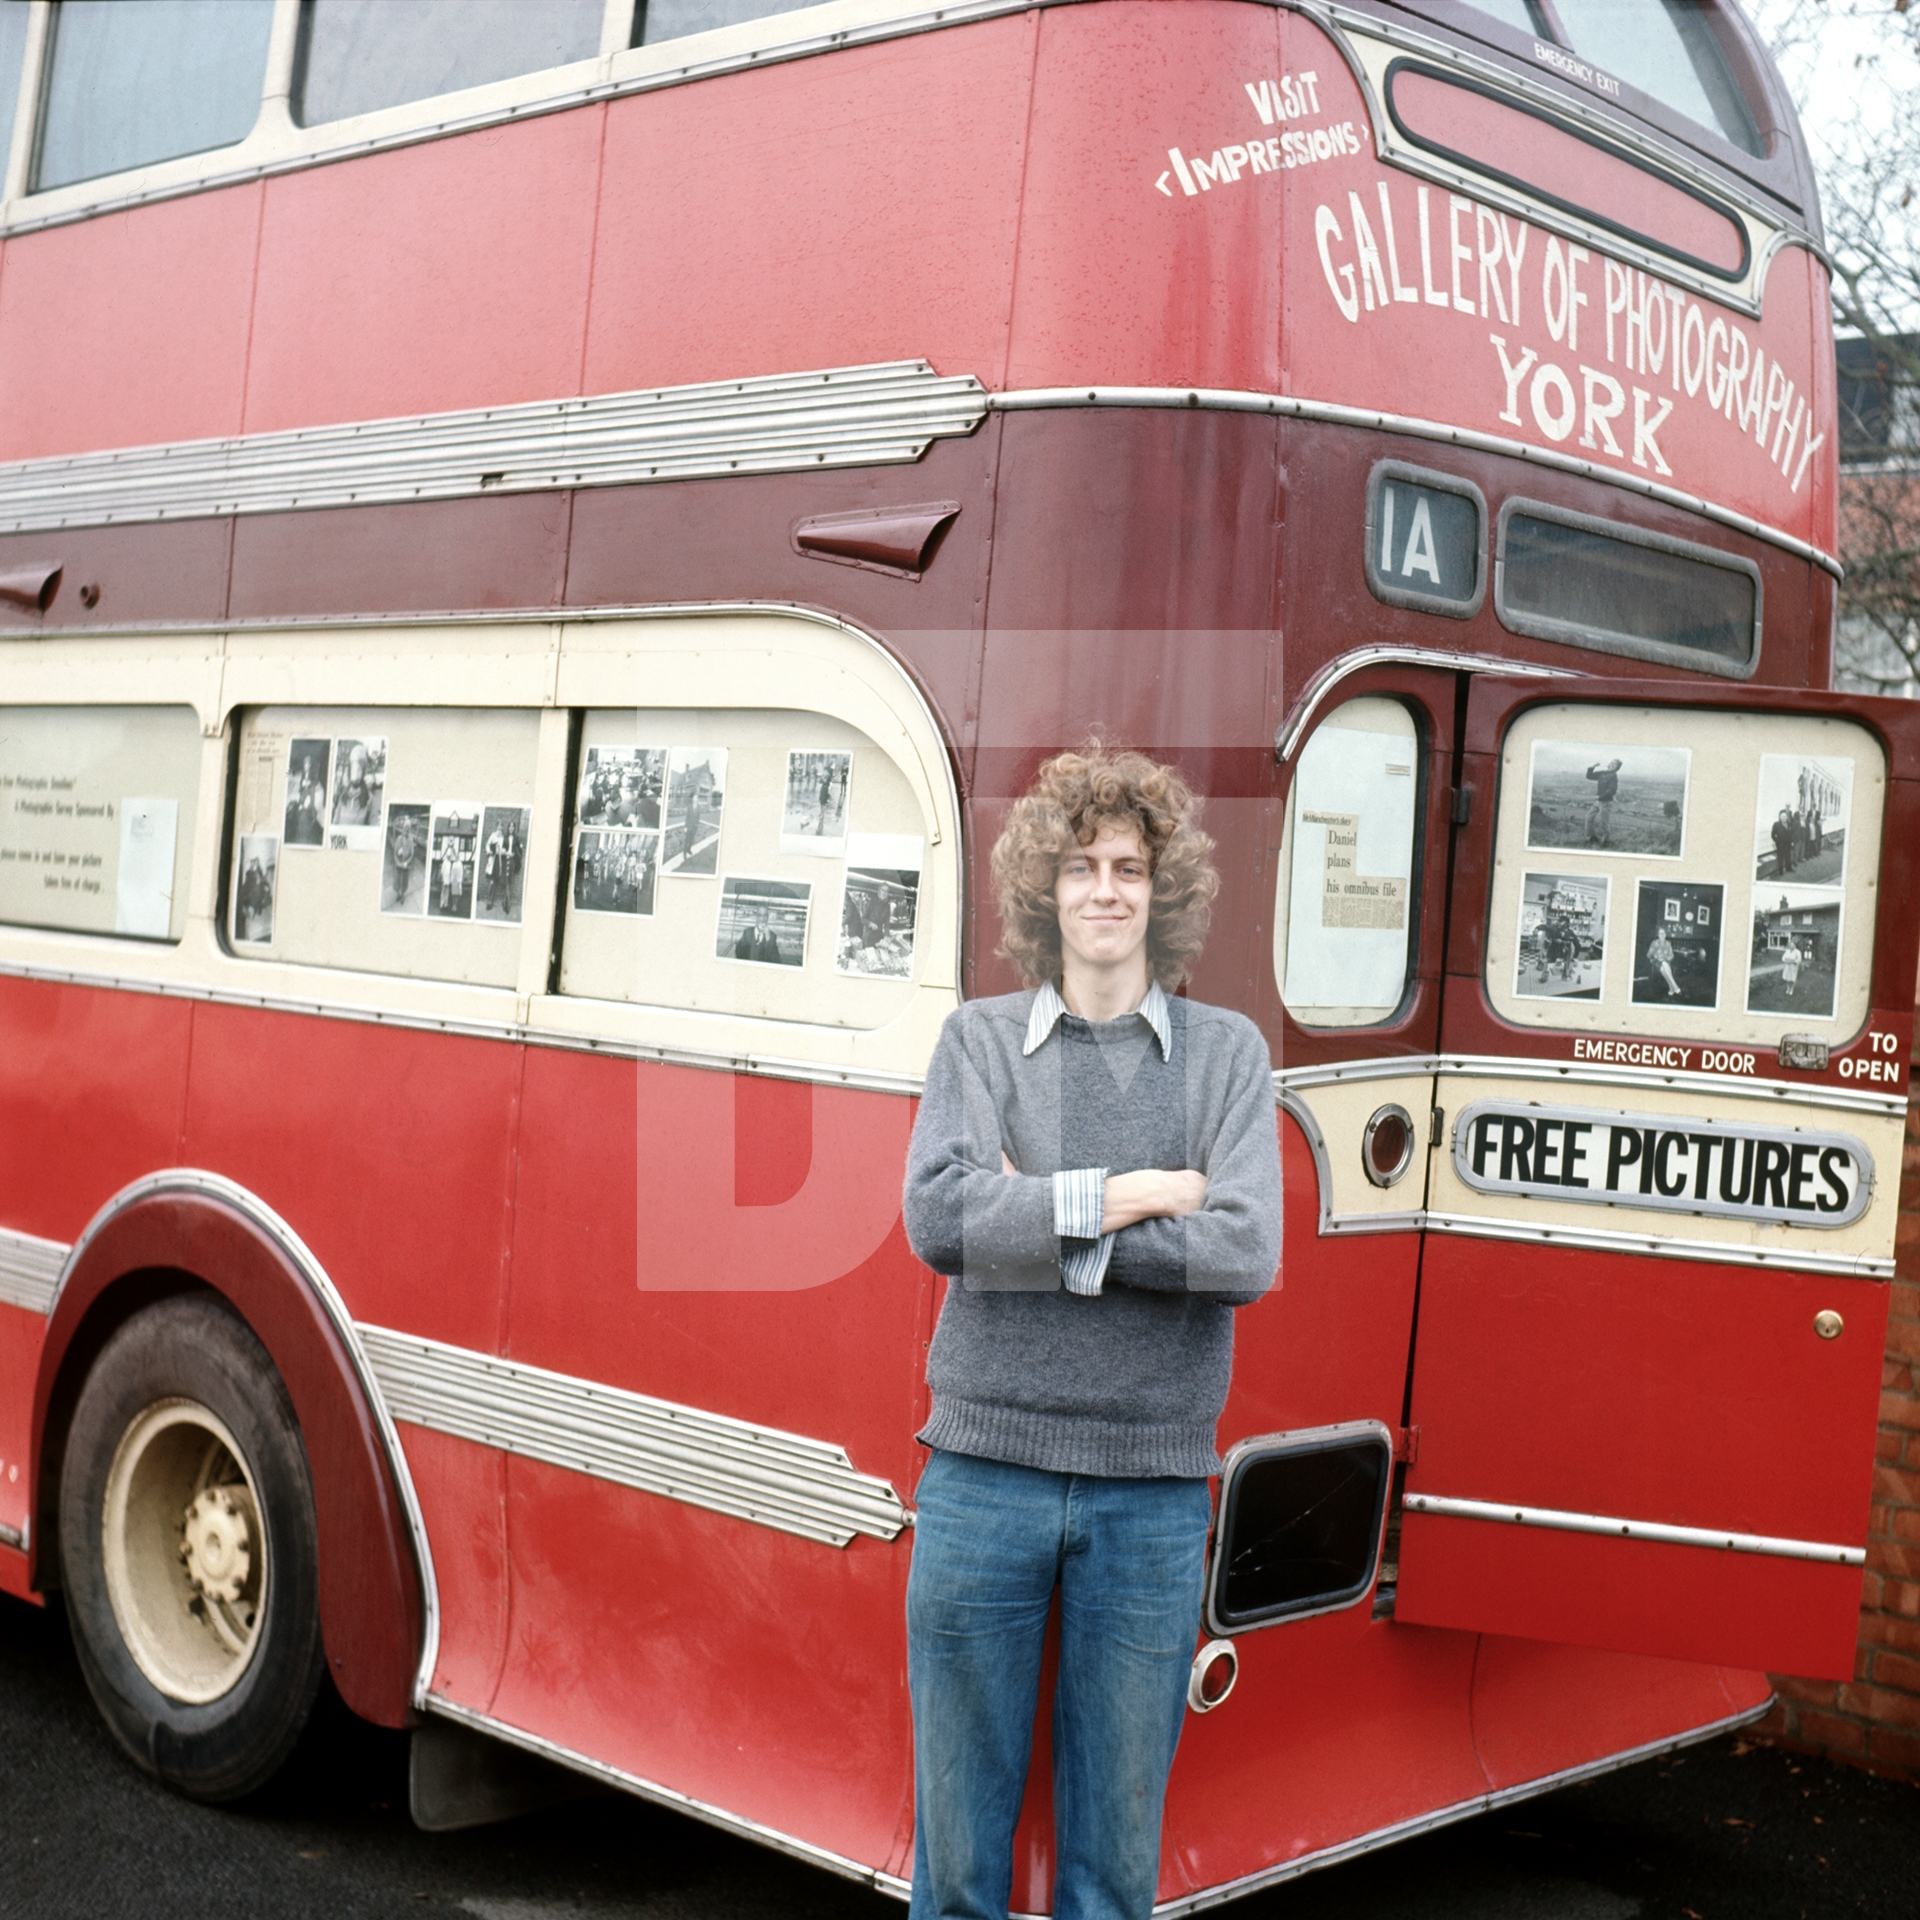 In late 1973, Andrew Sproxton of Impressions Gallery in York visited Daniel and, using a pair of scissors, cut freehand from a roll of stickyback plastic, a tailor-made advertisement which he applied to the rear upper exterior of the Free Photographic Omnibus. by Daniel Meadows